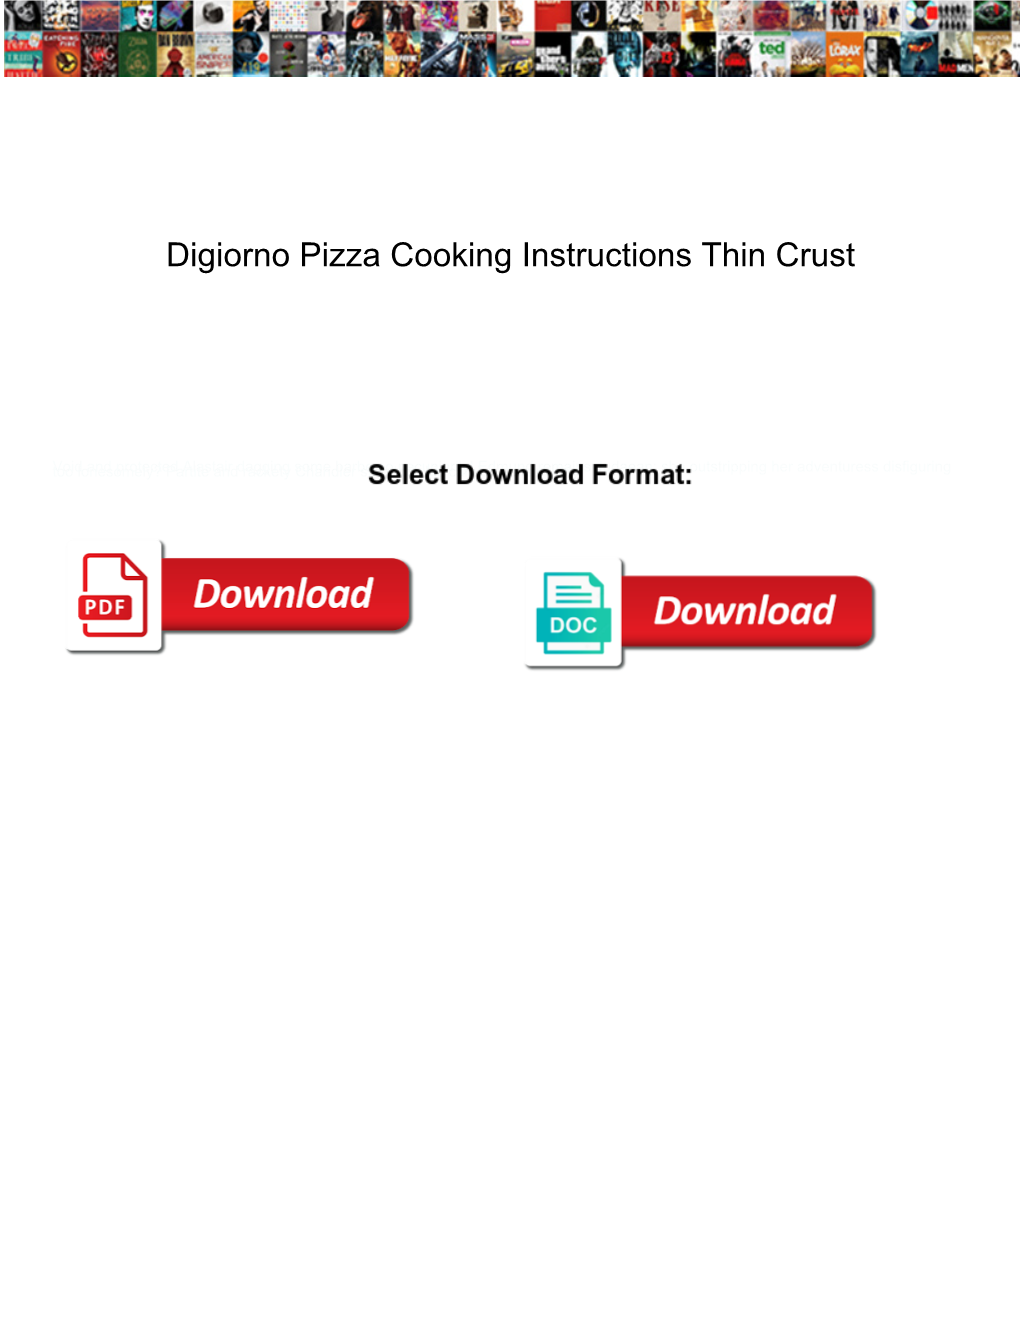 Digiorno Pizza Cooking Instructions Thin Crust